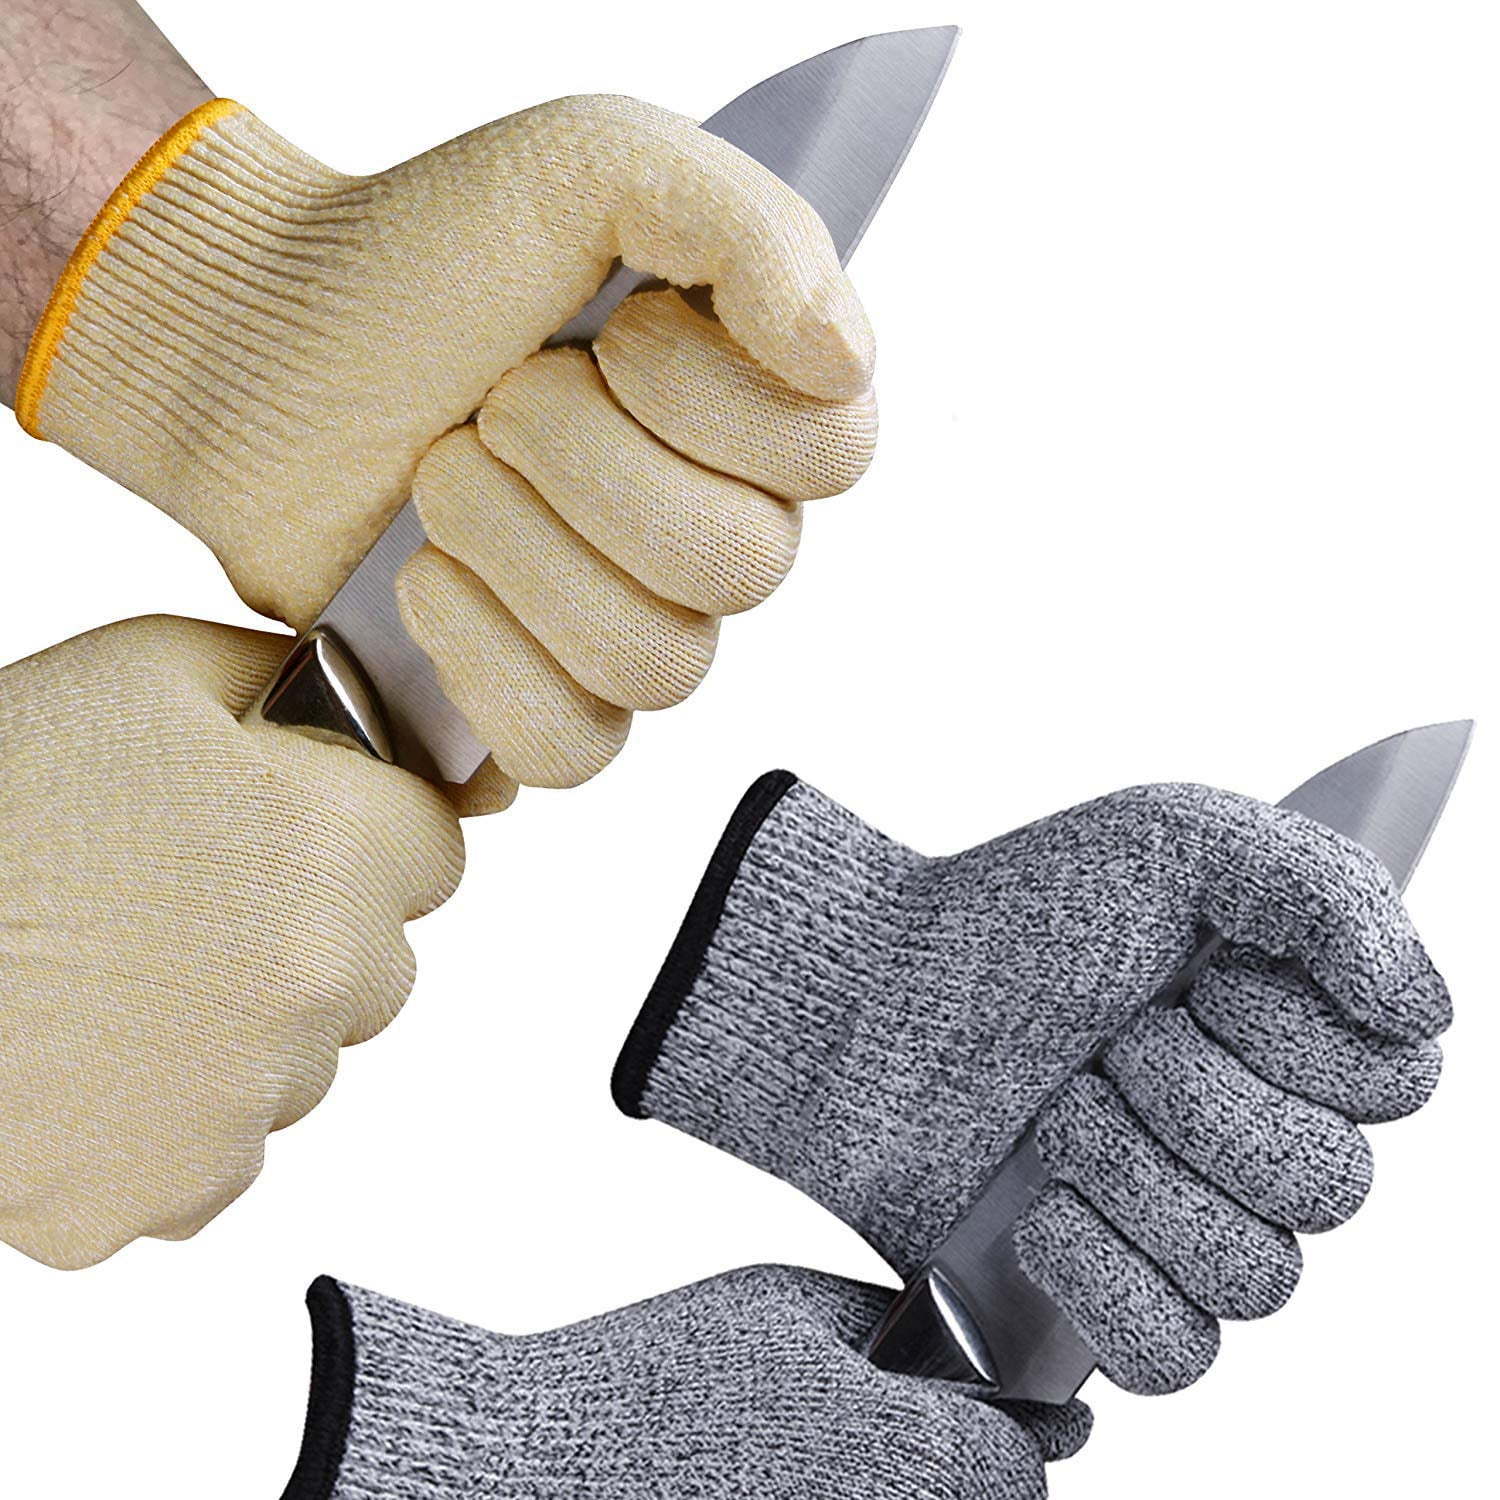 Level 5 Cut Resistant Work Gloves with Power Grip for Wood Carving  Carpentry, Glass Industry and other Constructions